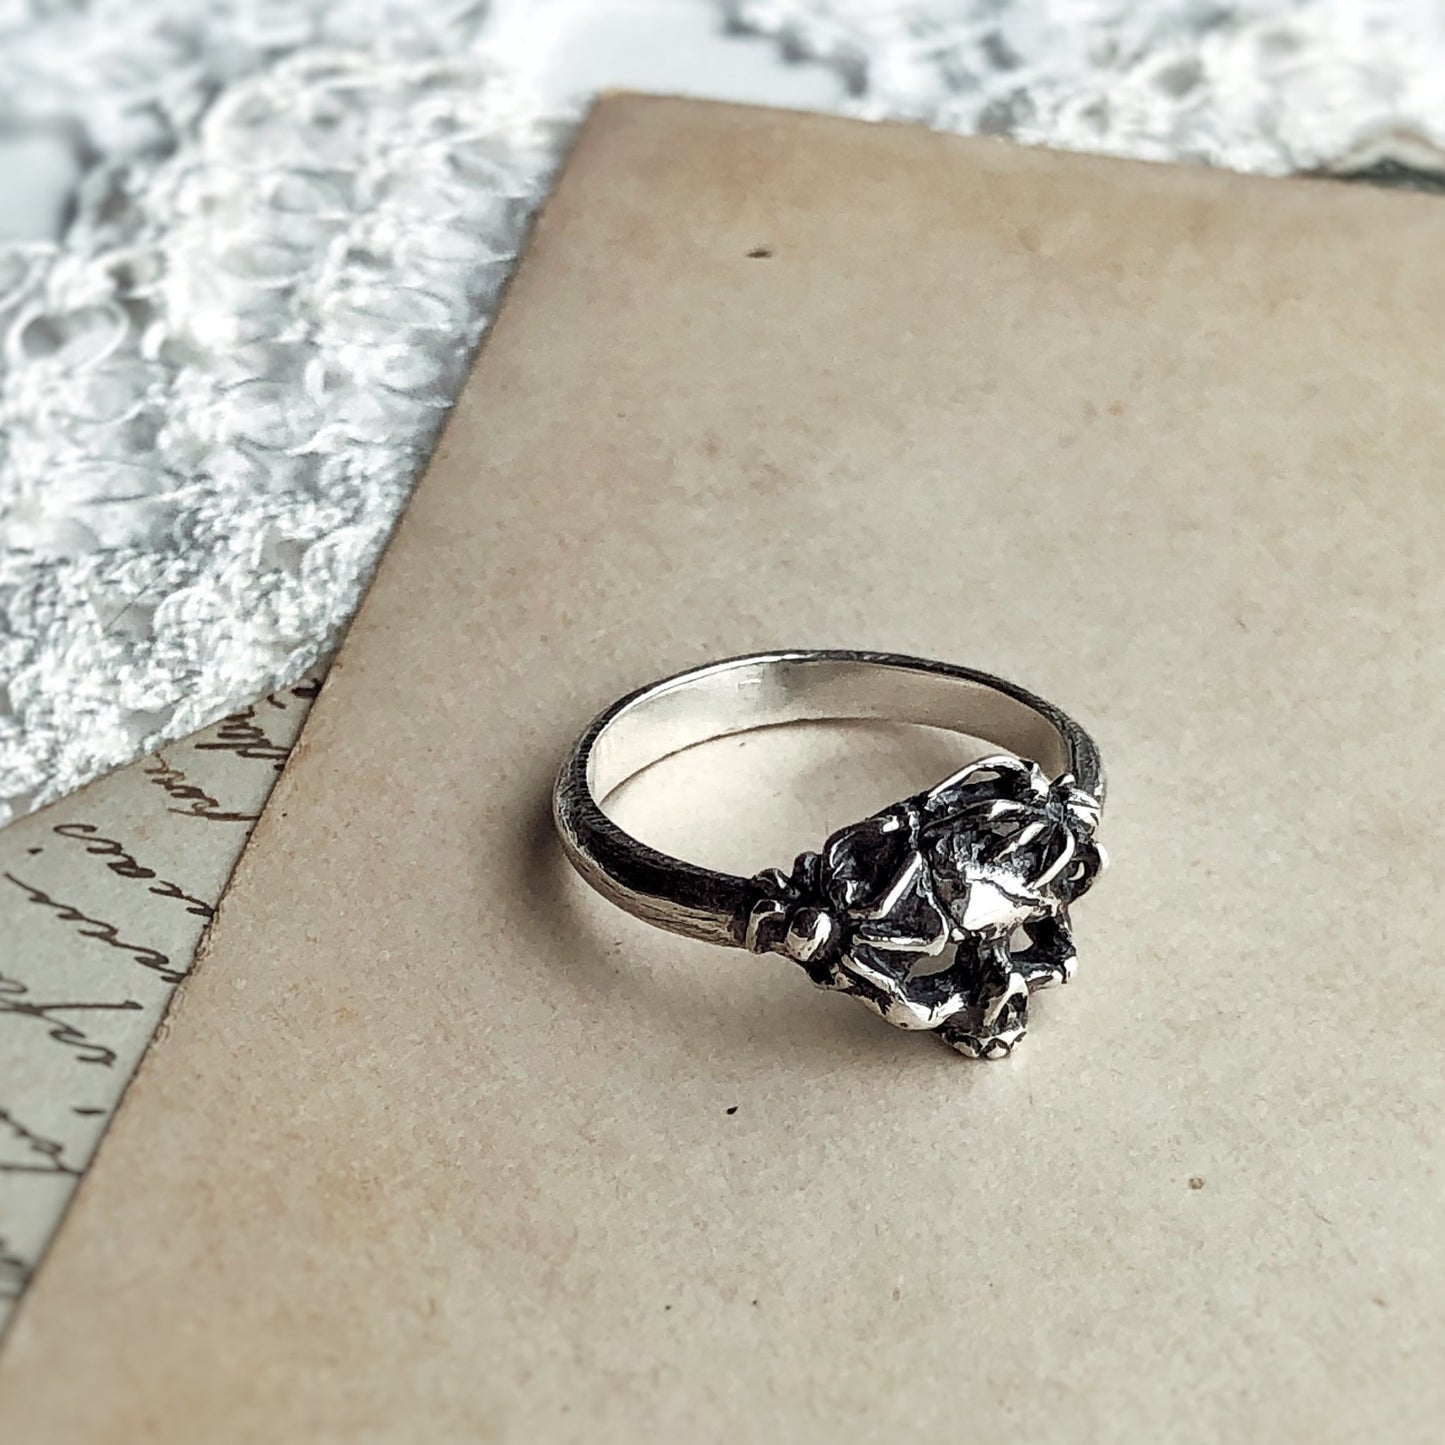 Skull Ring with Spiders, Gothic Jewelry, Sterling Silver, Artisan Made Jewelry, Nature inspired, Dark Academia